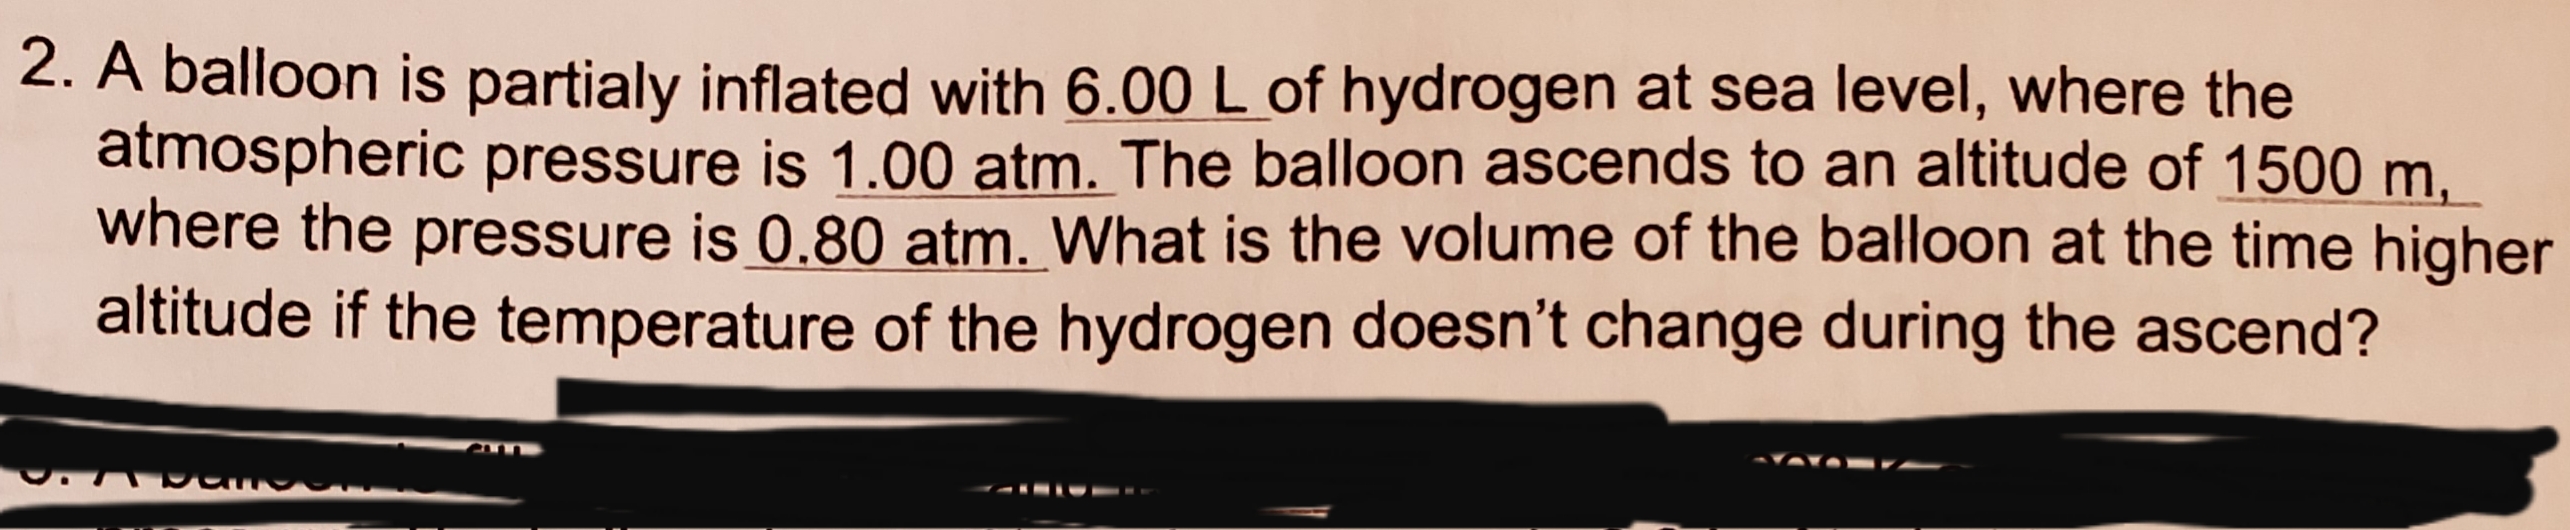 2. A balloon is partialy inflated with 6.00 L of hydrogen at sea level, where the
atmospheric pressure is 1.00 atm. The balloon ascends to an altitude of 1500 m
where the pressure is 0.80 atm. What is the volume of the balloon at the time higher
altitude if the temperature of the hydrogen does n't change during the ascend?
